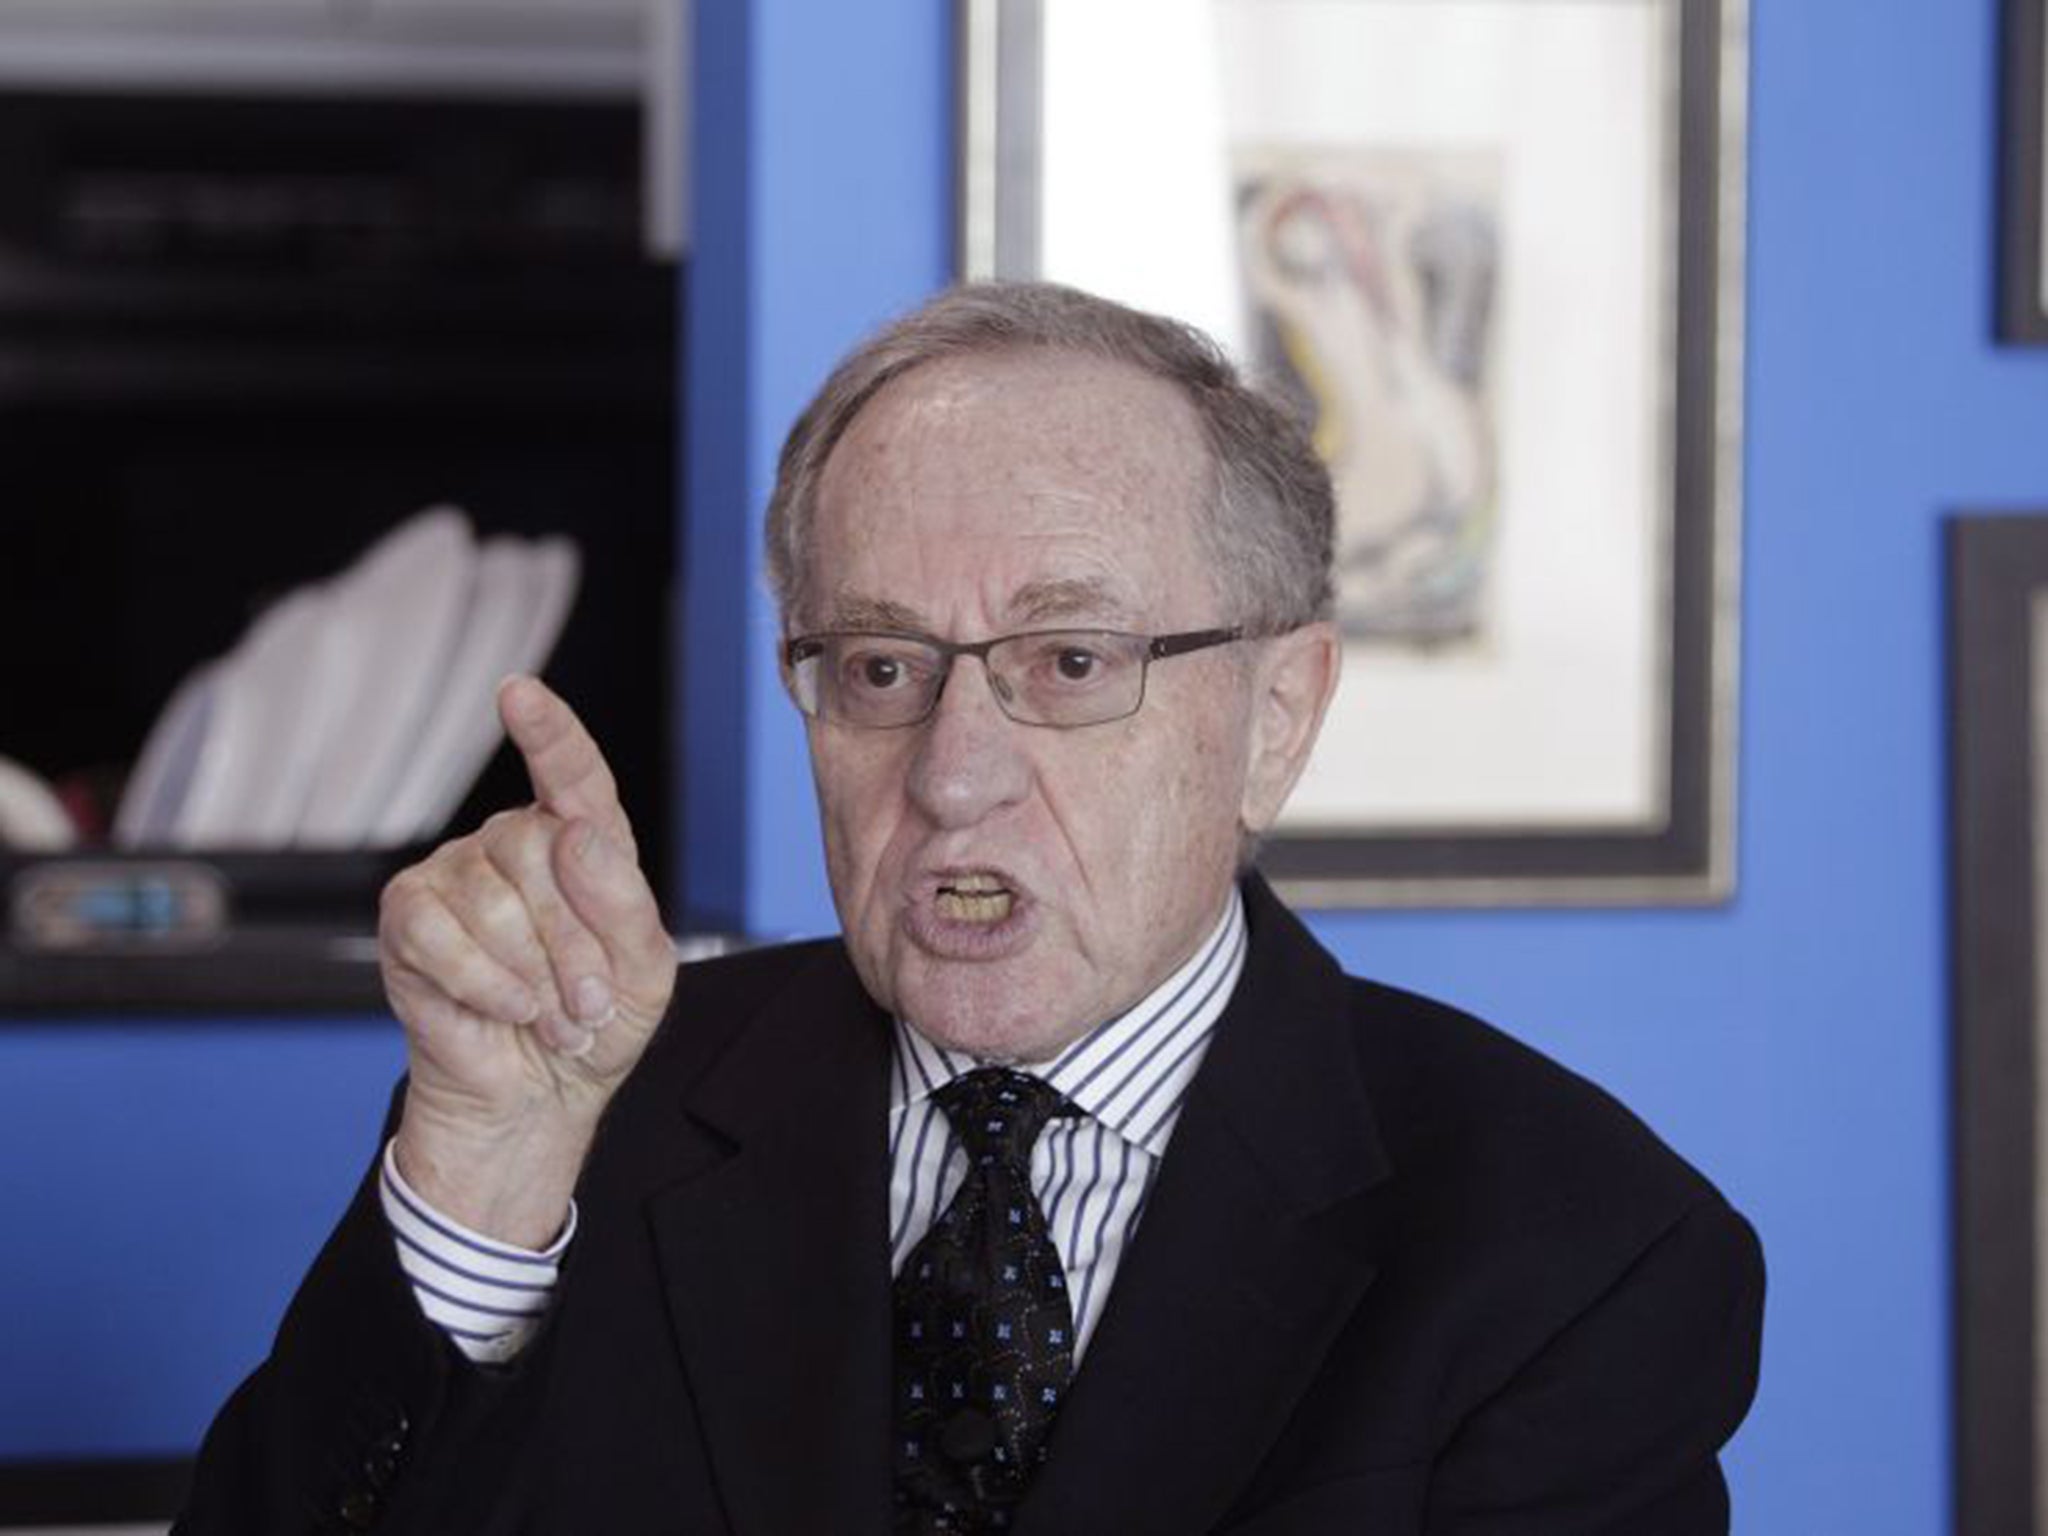 Alan Dershowitz discussed the allegations levelled against him during an interview at his home in Miami on Monday (Reuters)